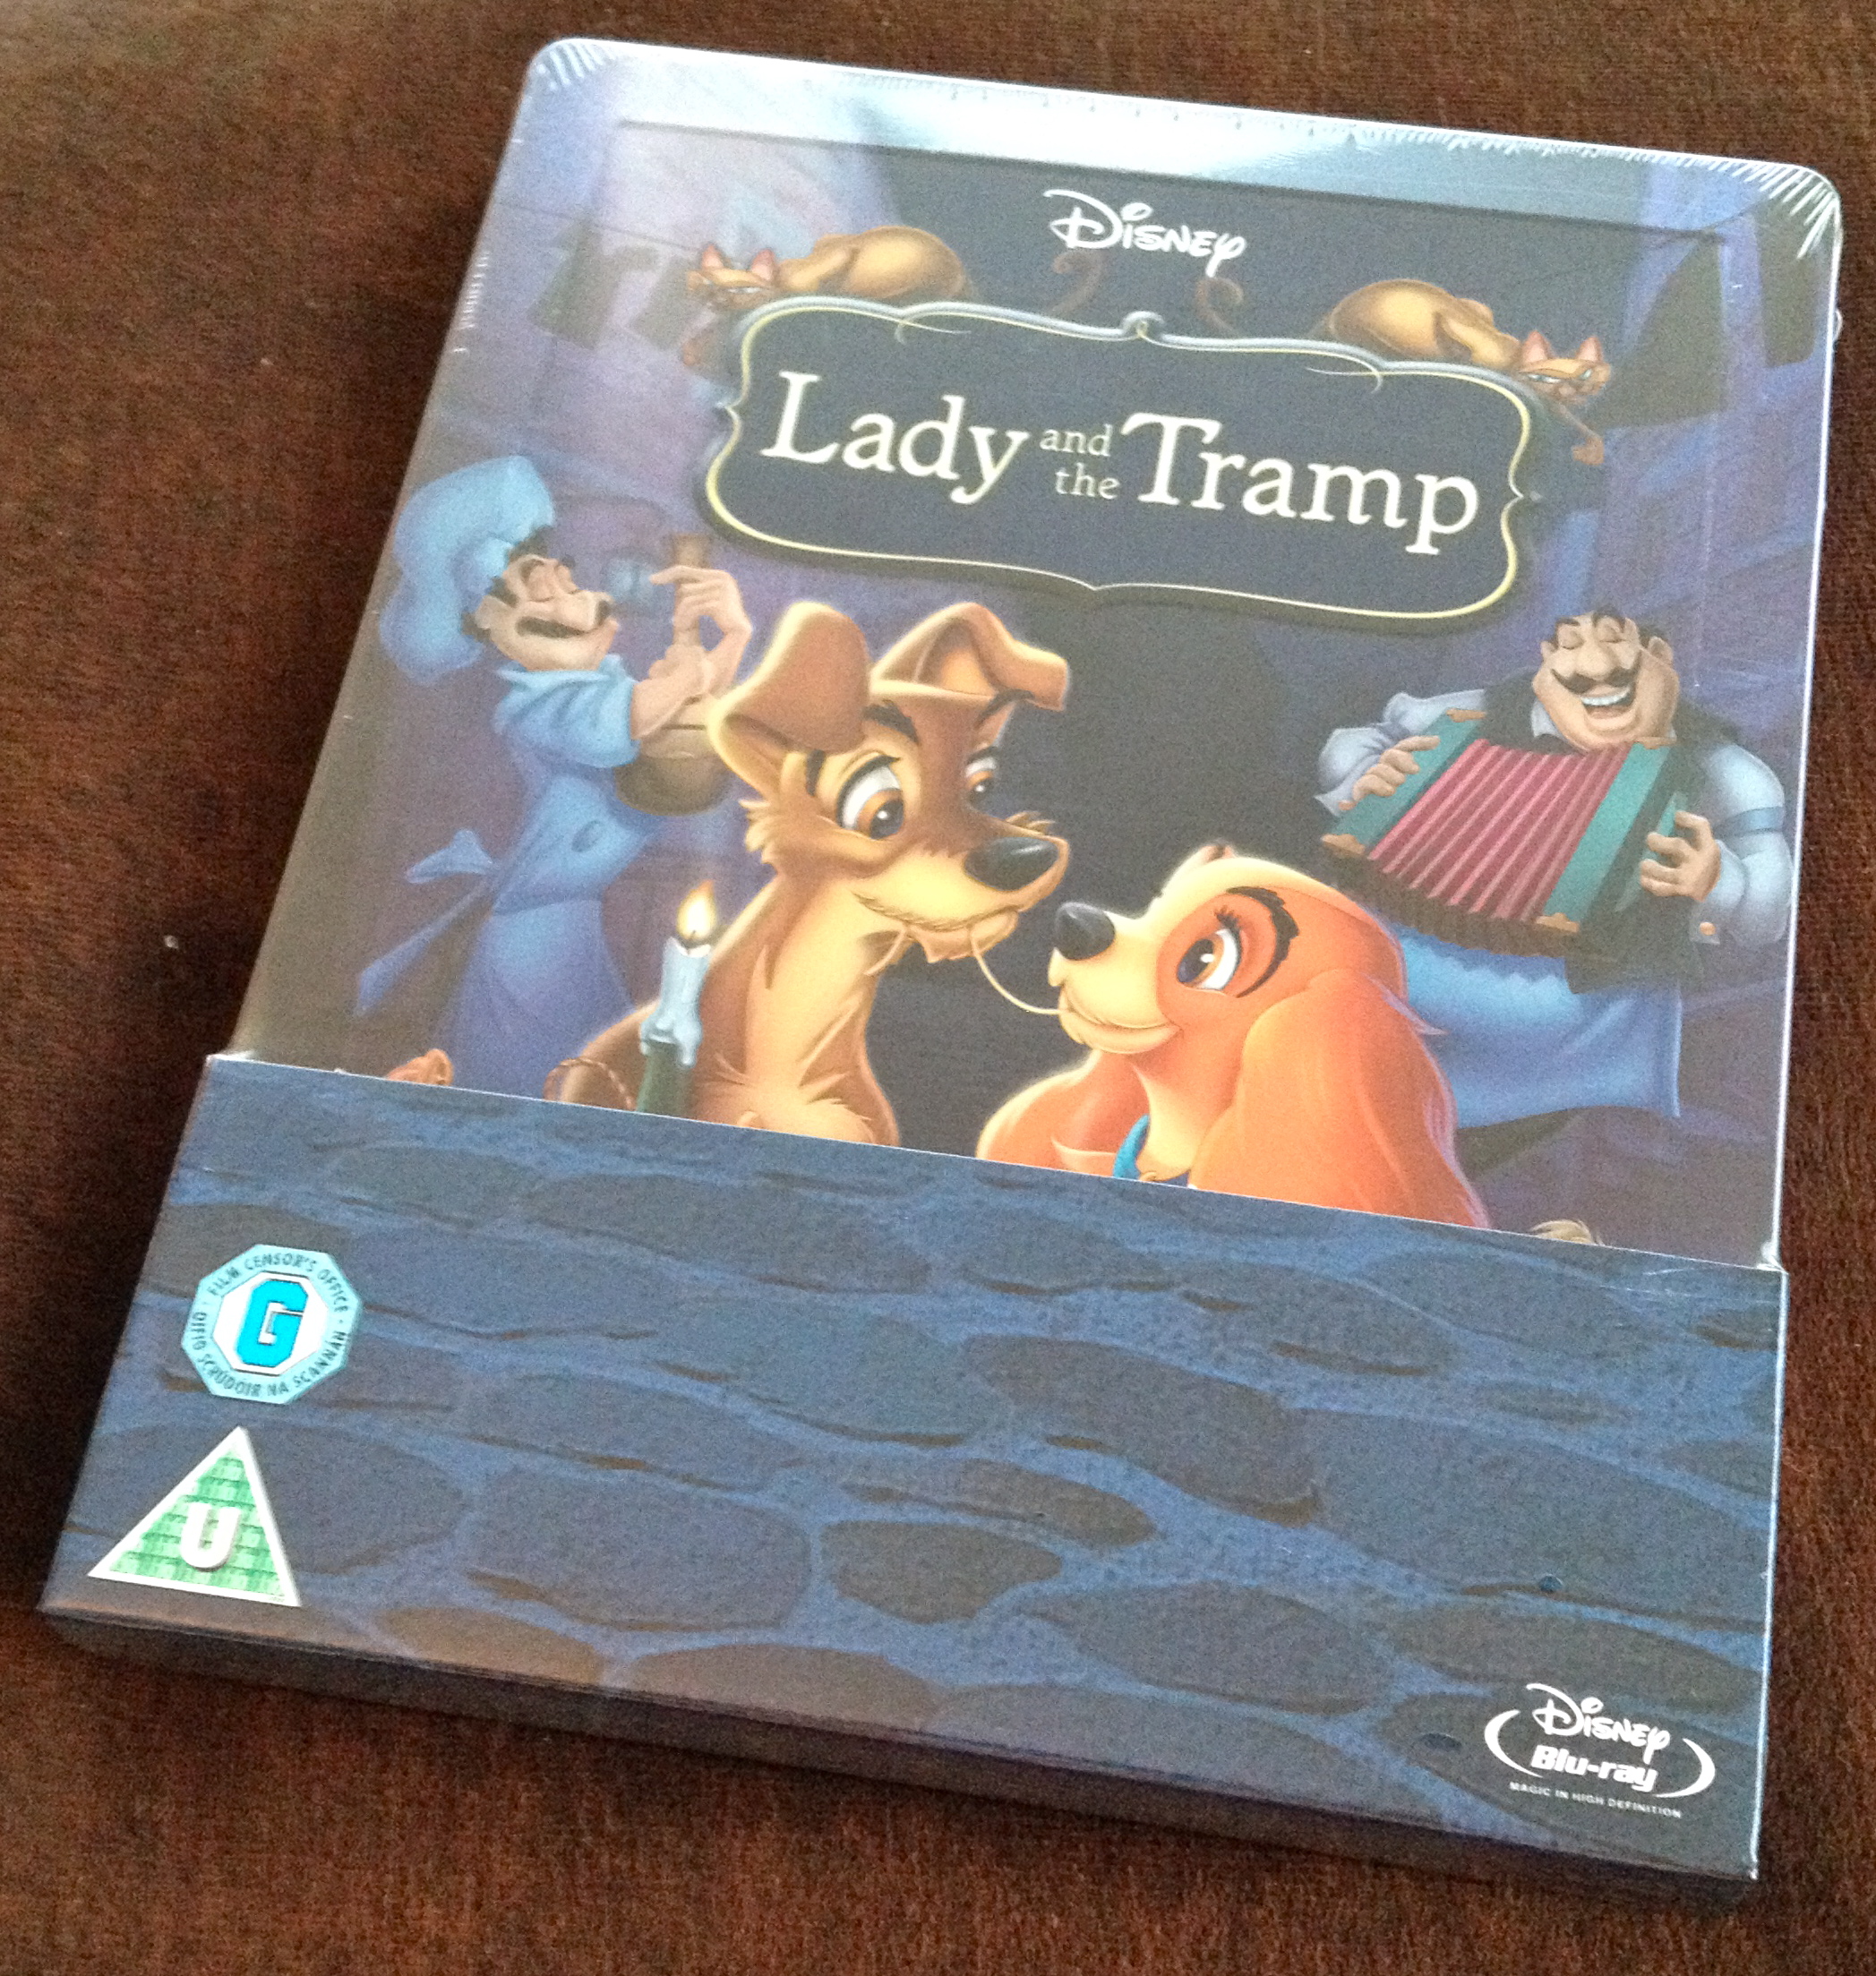 LADY AND THE TRAMP (Zavvi...Released February 17th, 2014)